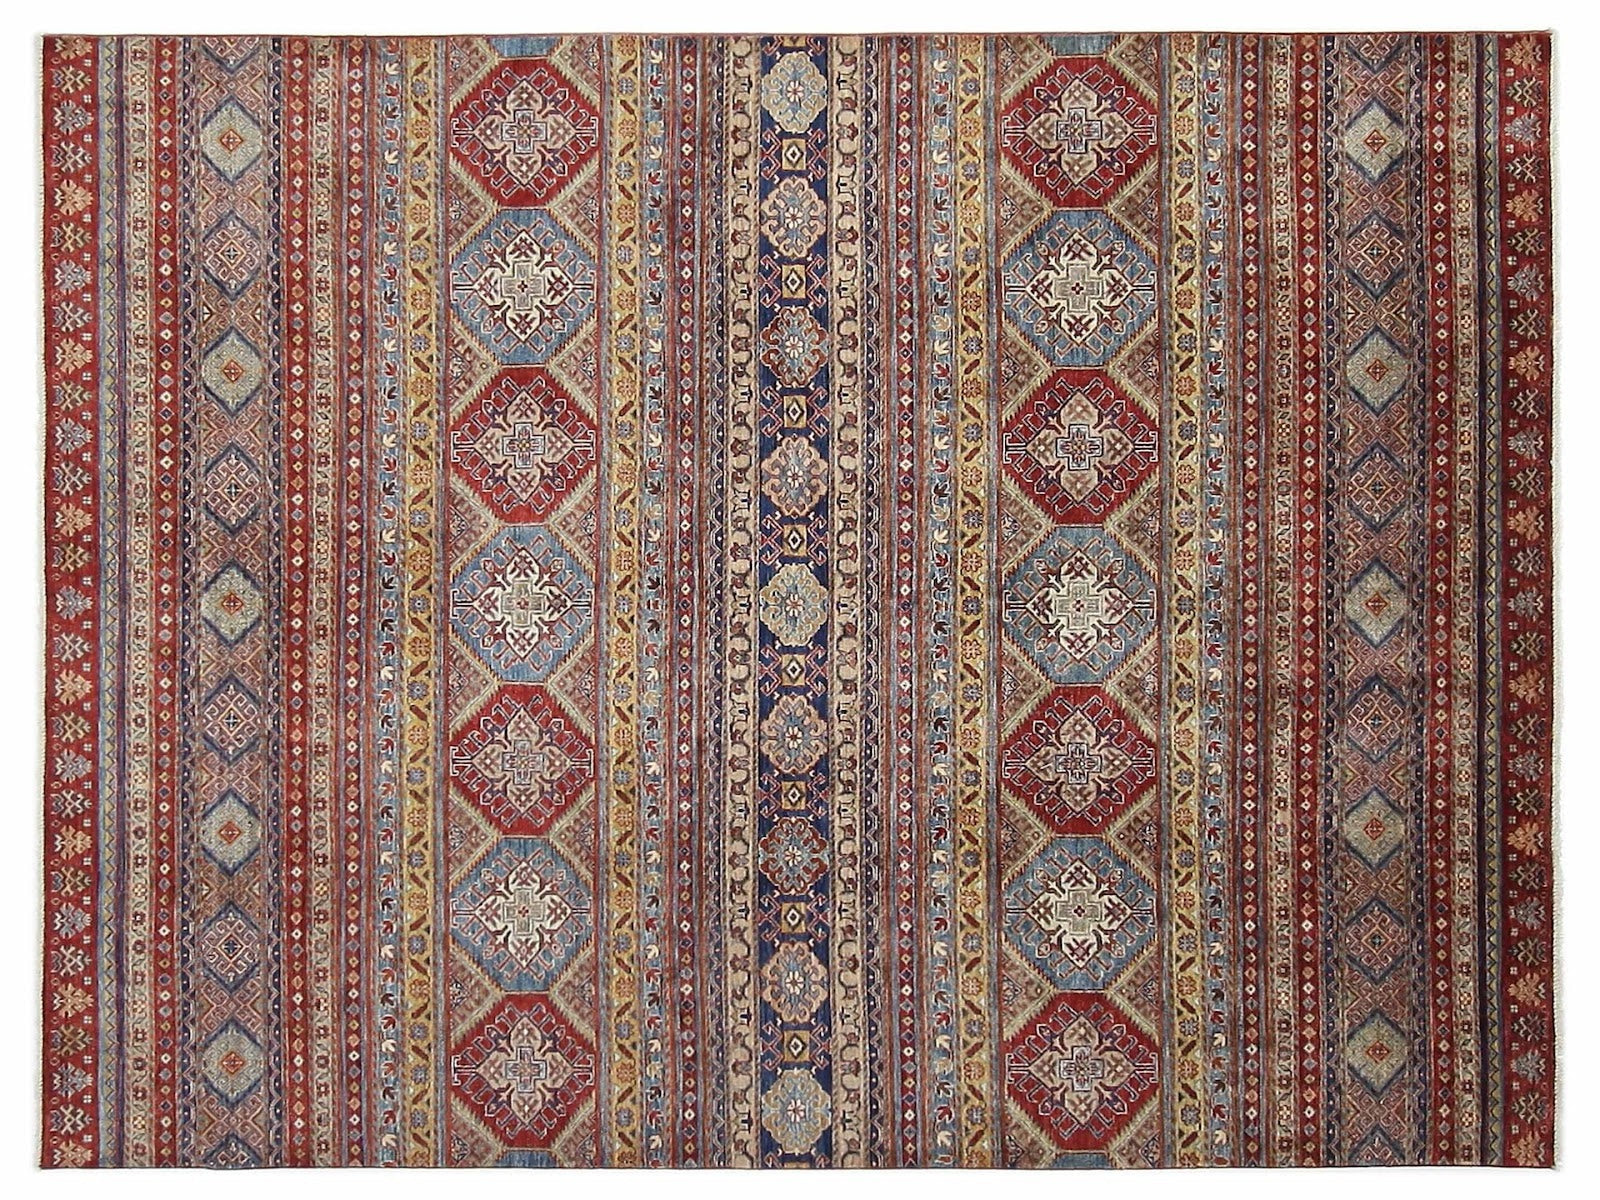 8x10 tribal rug featuring a diverse palette of blues, reds, purples, yellows, and blacks, with geometric designs, hand-knotted in 100% wool.